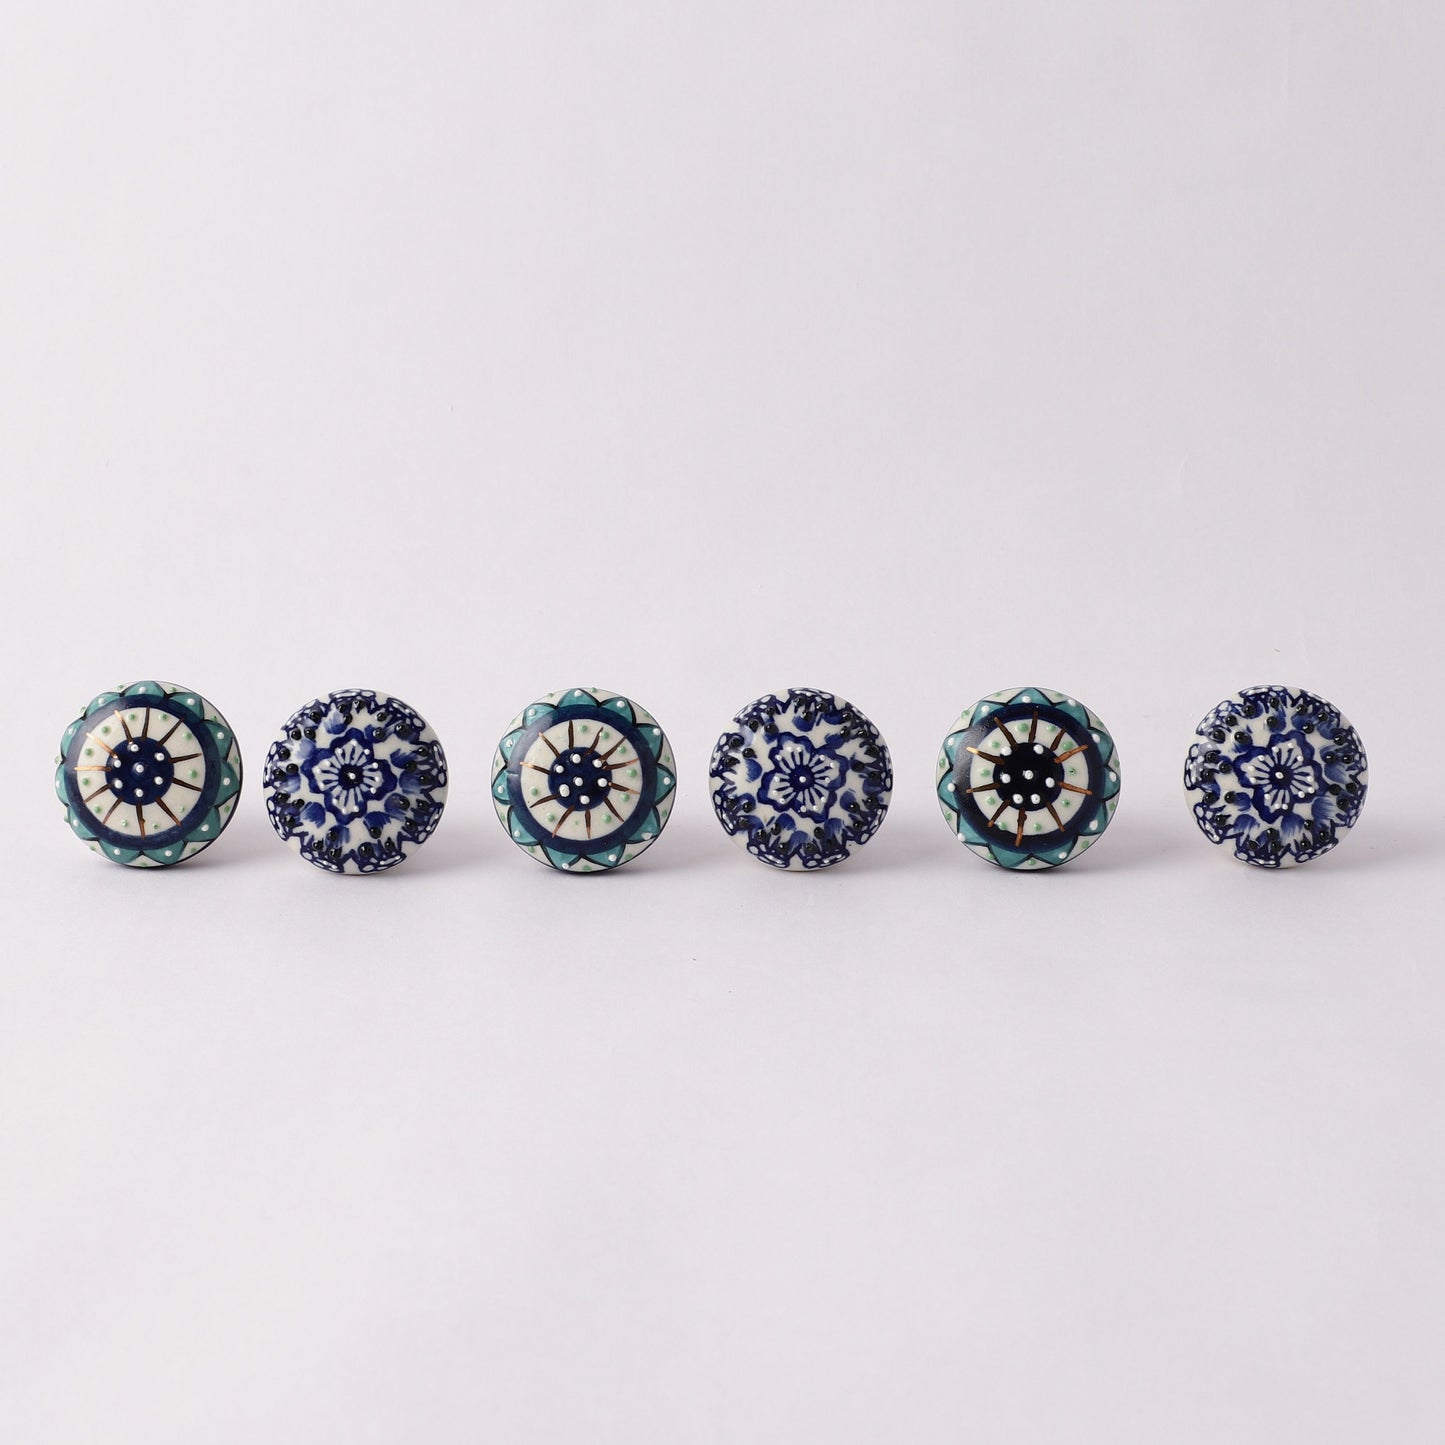 Classic Style Teal and Blue Ceramic Pull Knobs (C25)